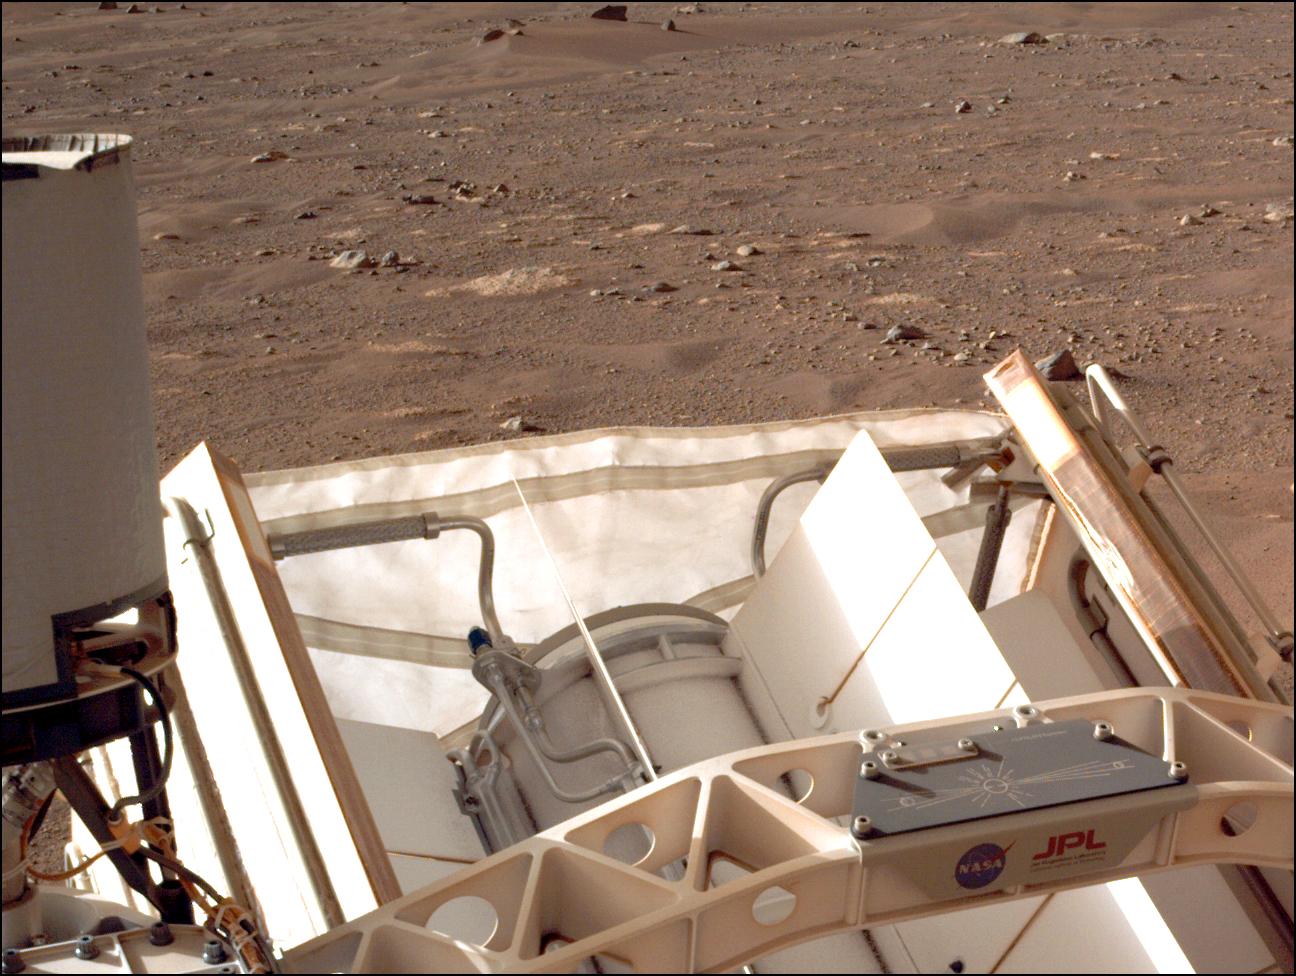 PIA24615: Closeup of Send Your Name to Mars Chips on Perseverance Rover